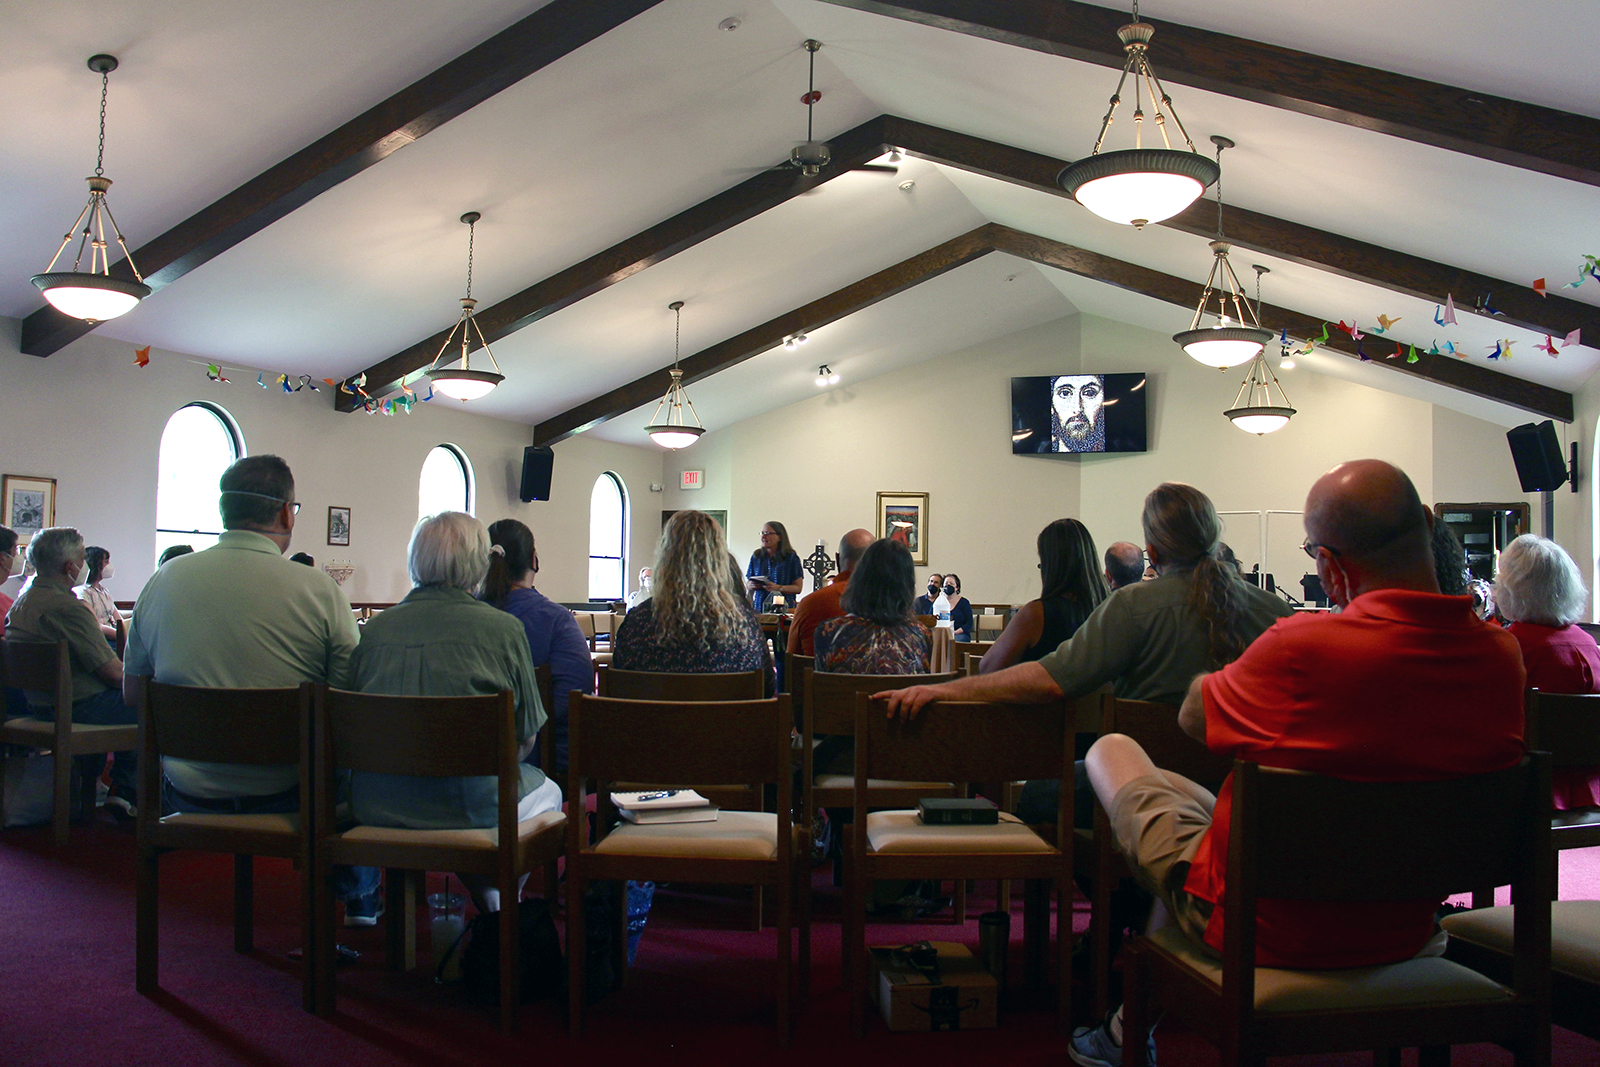 The congregation at Life on the Vine Church in Long Grove, Illinois on May 15, 2022. RNS Photo by Emily McFarlan Miller